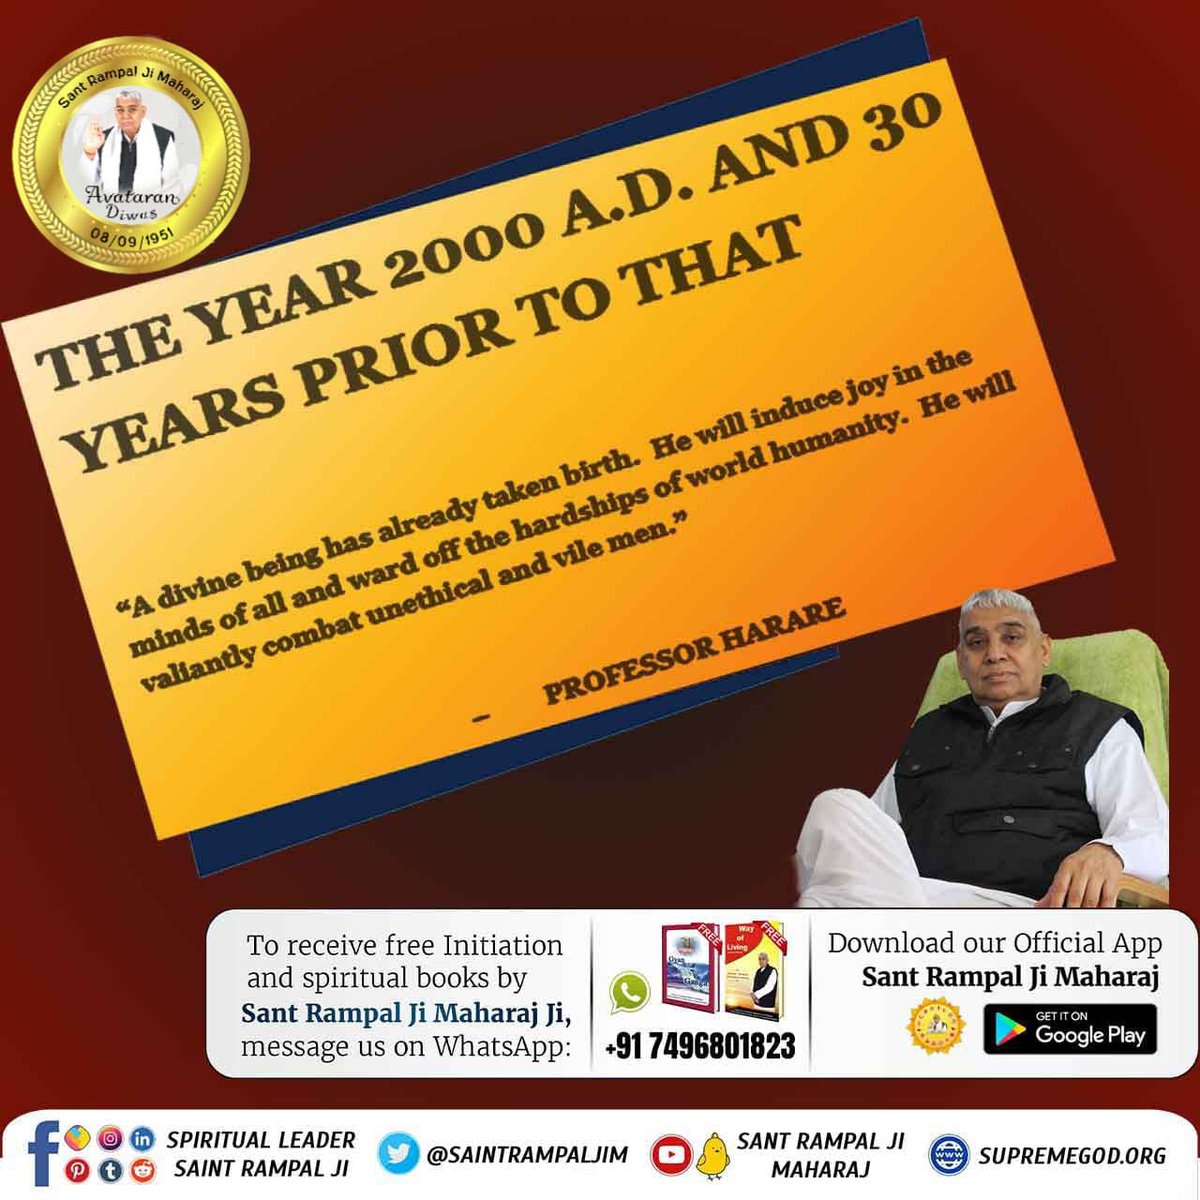 #1DayLeft_For_AvataranDiwas
Saint Rampal Ji received Naam Updesh on 17th February, 1988 on the new moon night of Phalgun month. Preaching Day in Santmat | The preacher is considered to be the spiritual birthday of the devotee.
Sant Rampal Ji Maharaj